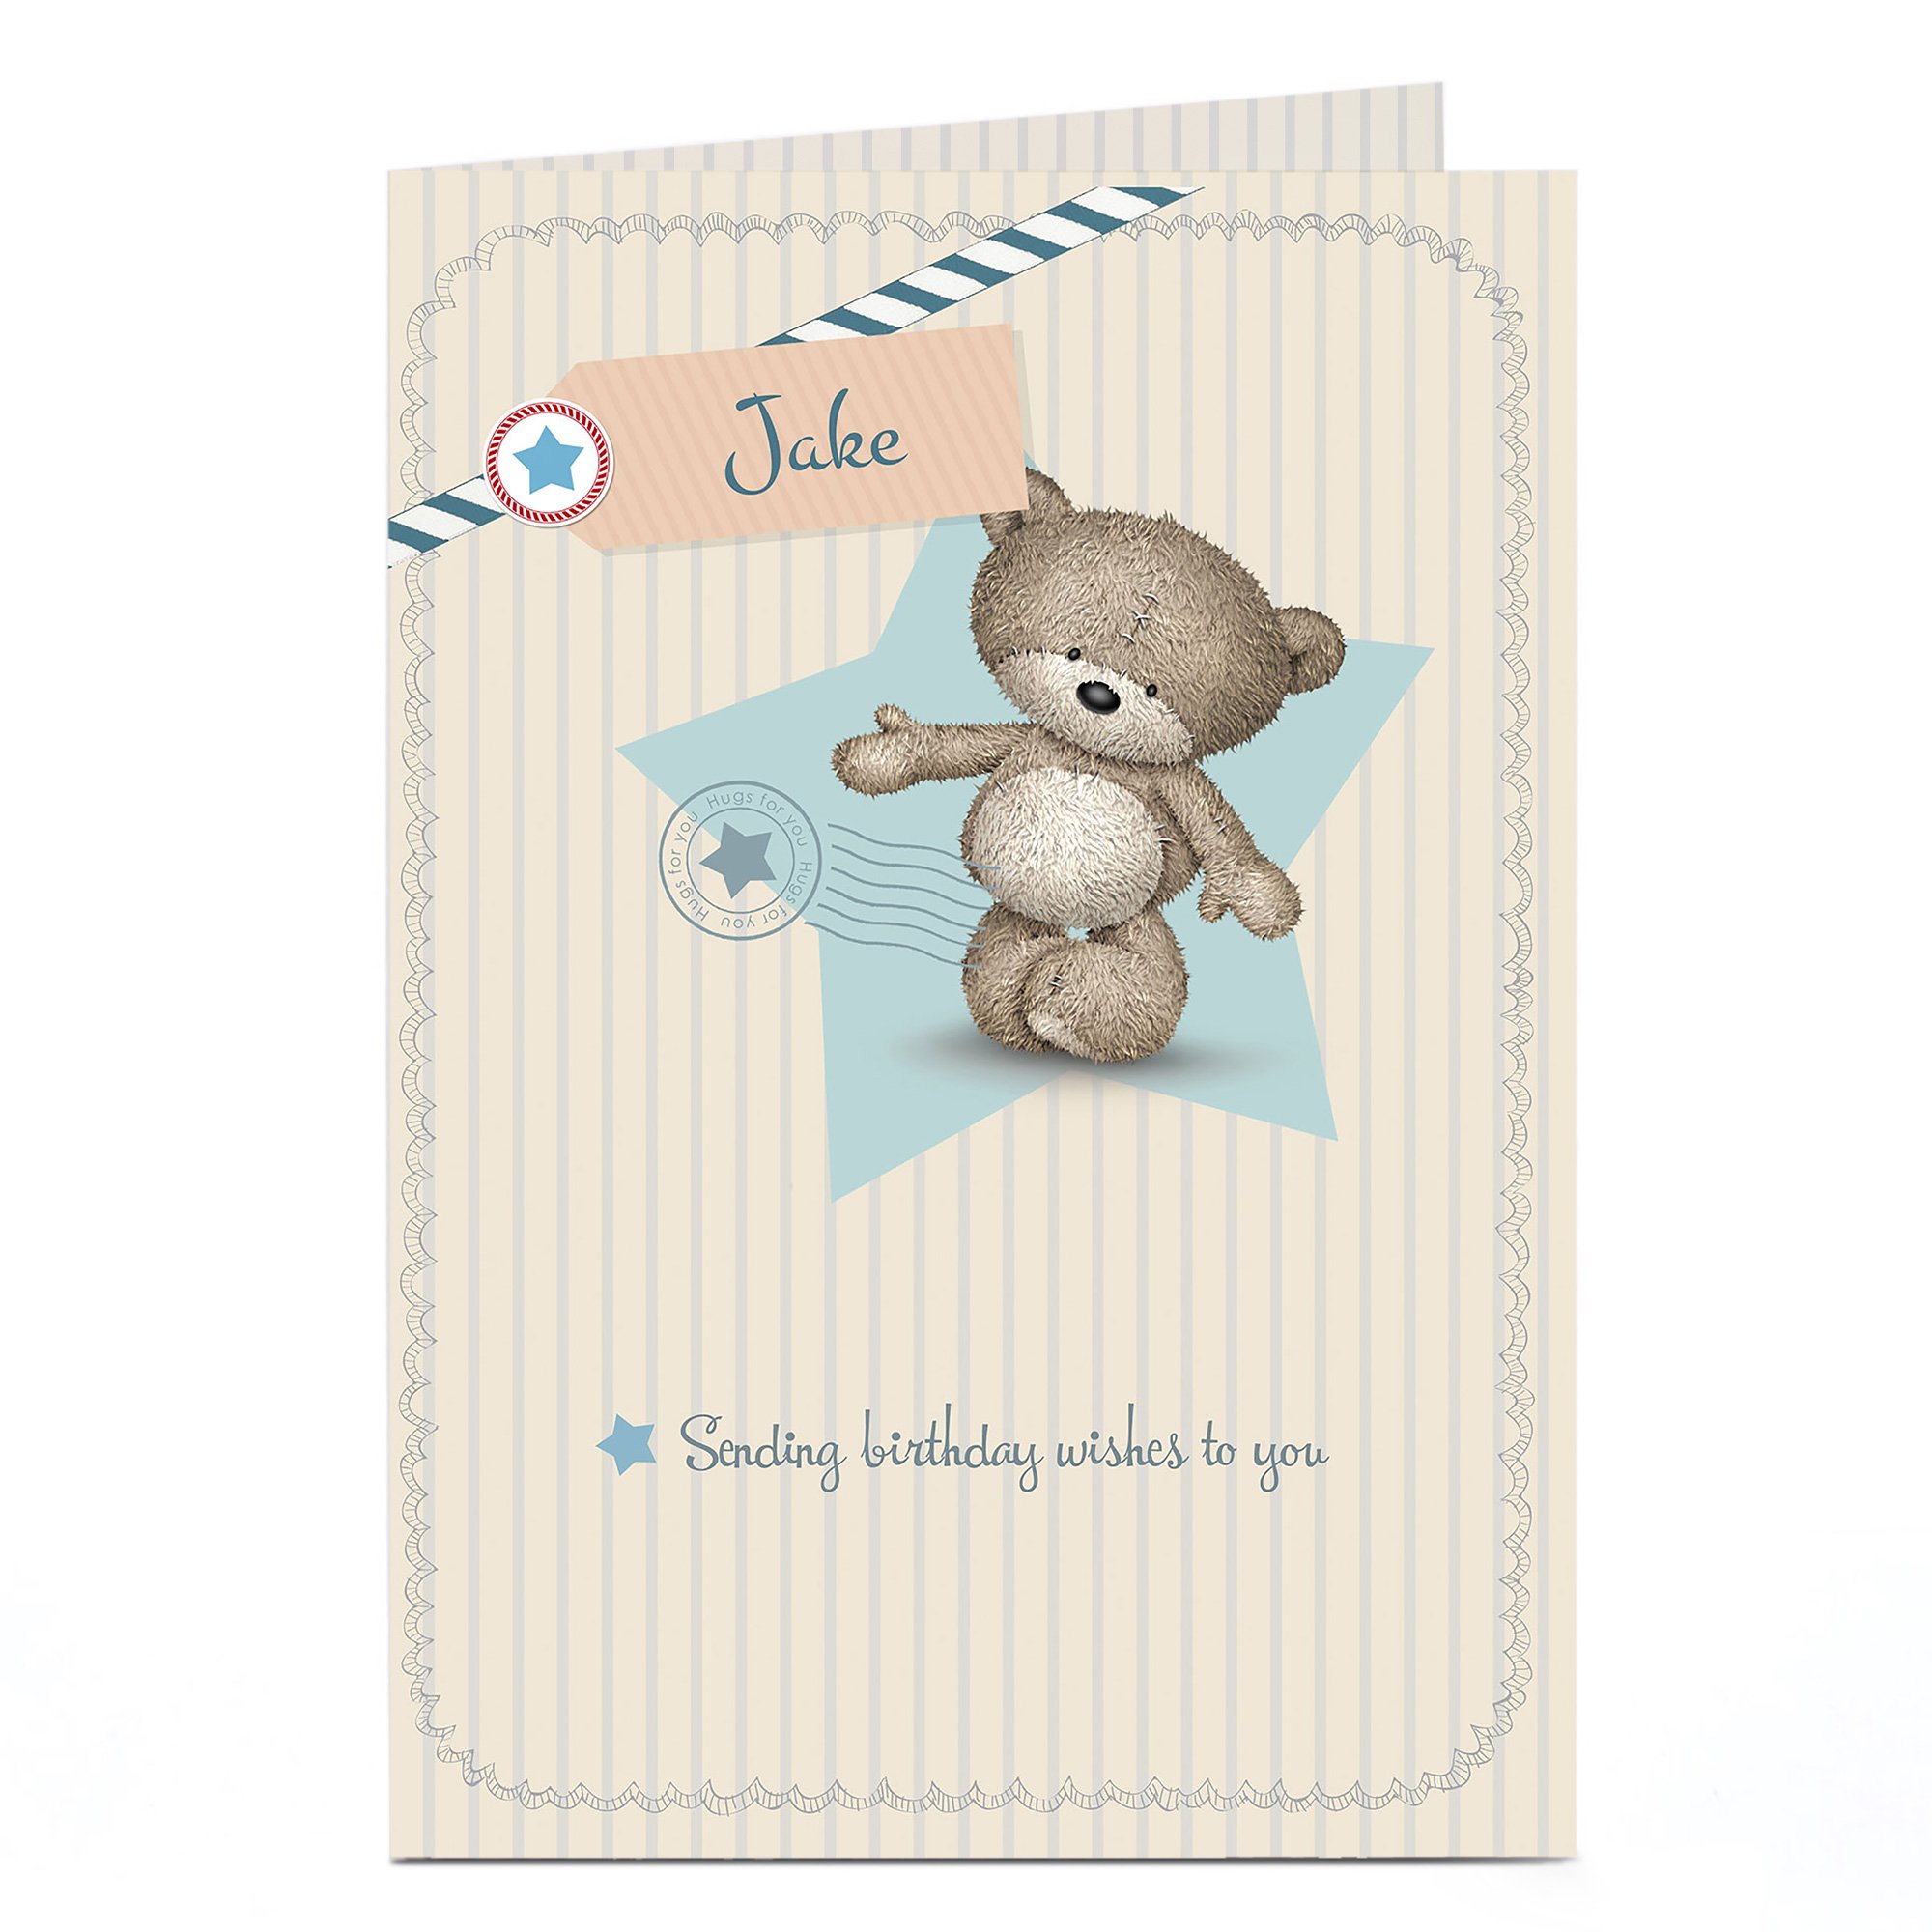 Personalised Hugs Bear Birthday Card - Sending Wishes To You